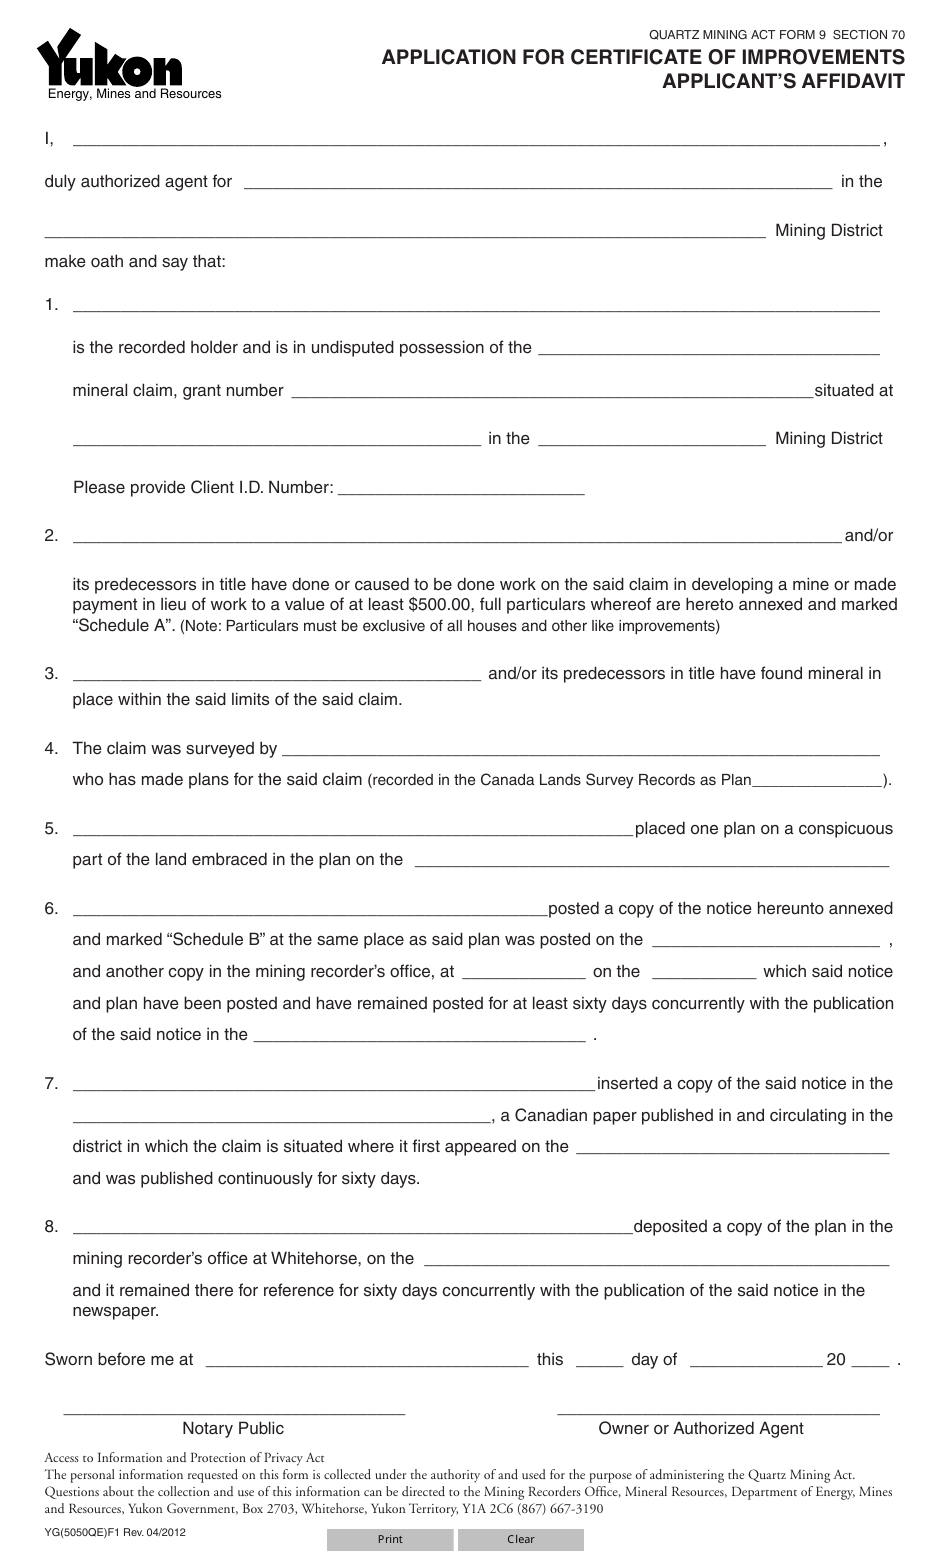 Form YG5050 Application for Certificate of Improvements Applicants Affidavit - Yukon, Canada, Page 1